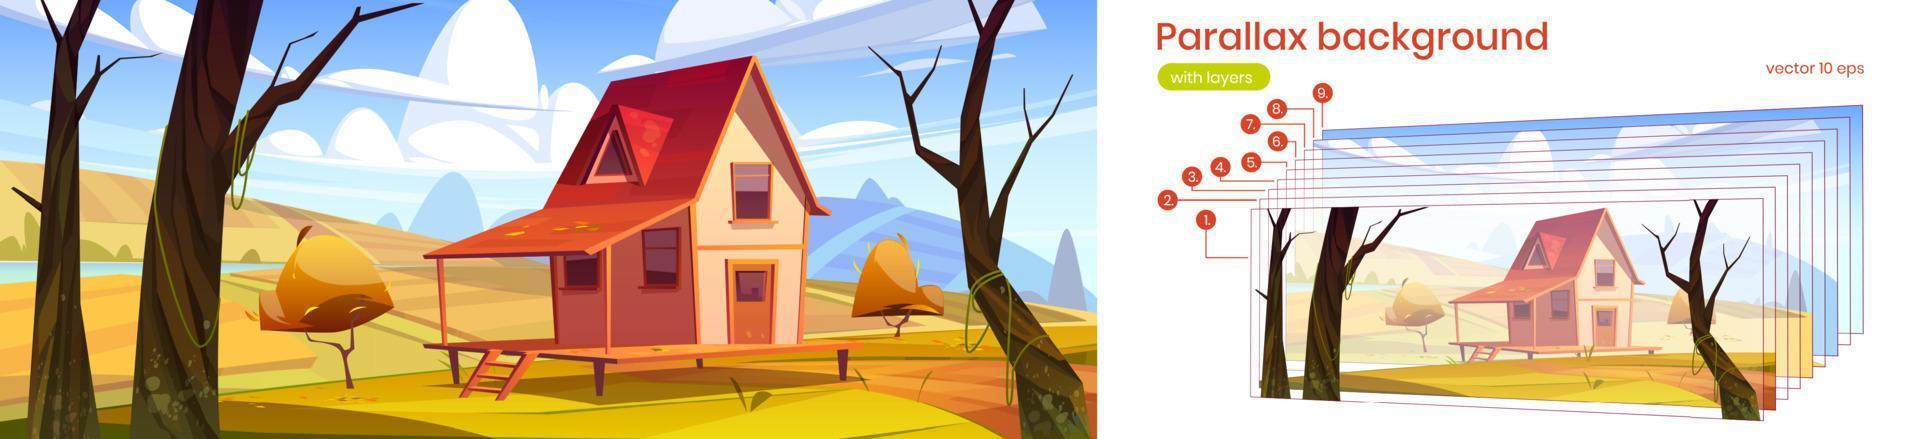 Parallax background with house and autumn fields vector